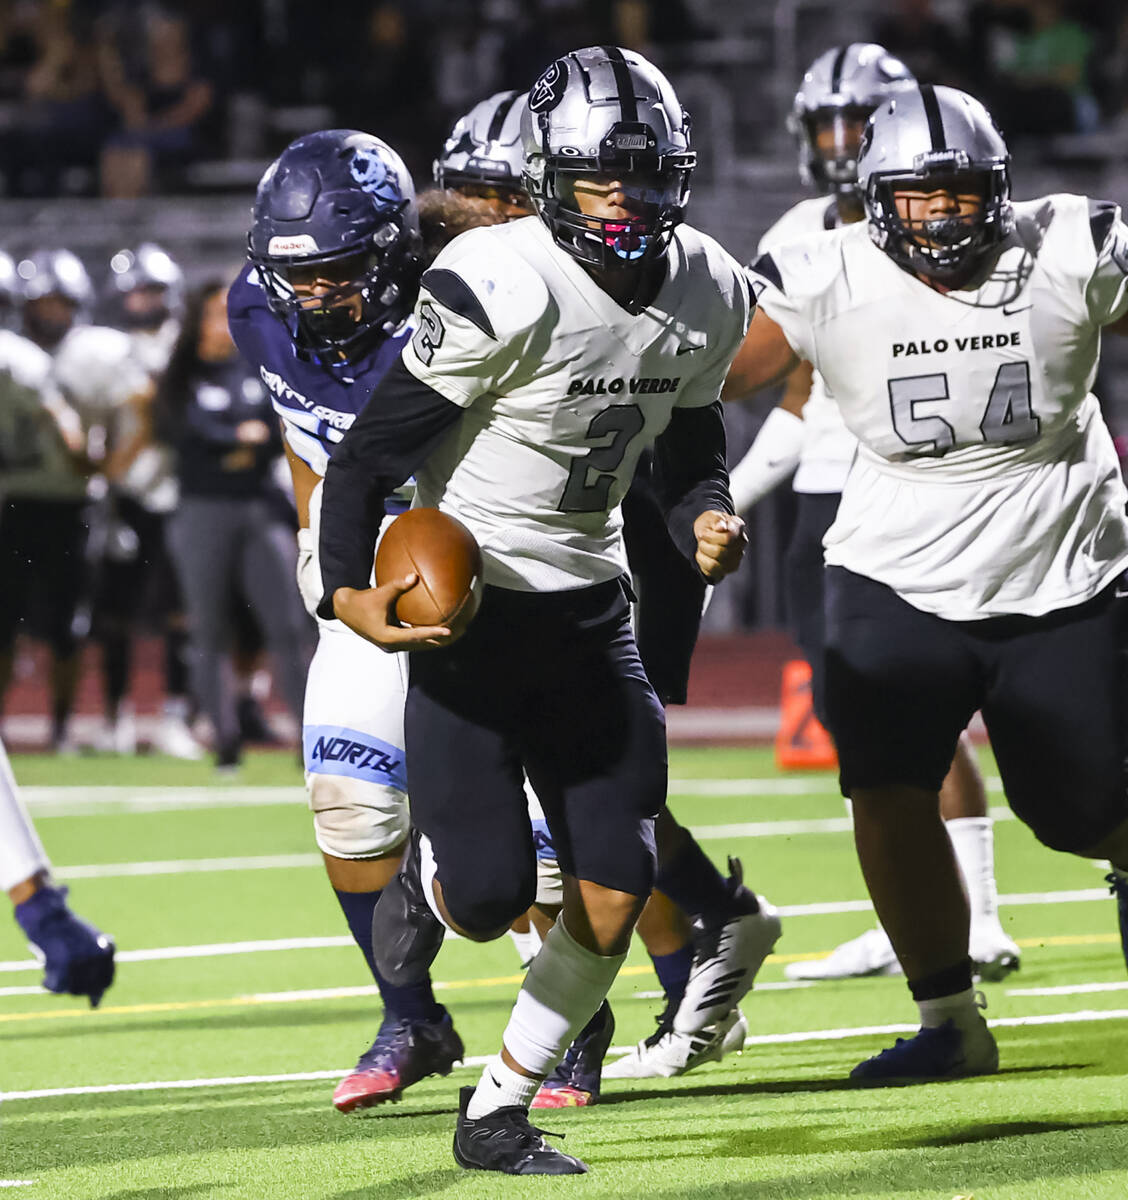 Palo Verde's running back Paisley Nickelson (2) runs the ball to score a touchdown during the f ...